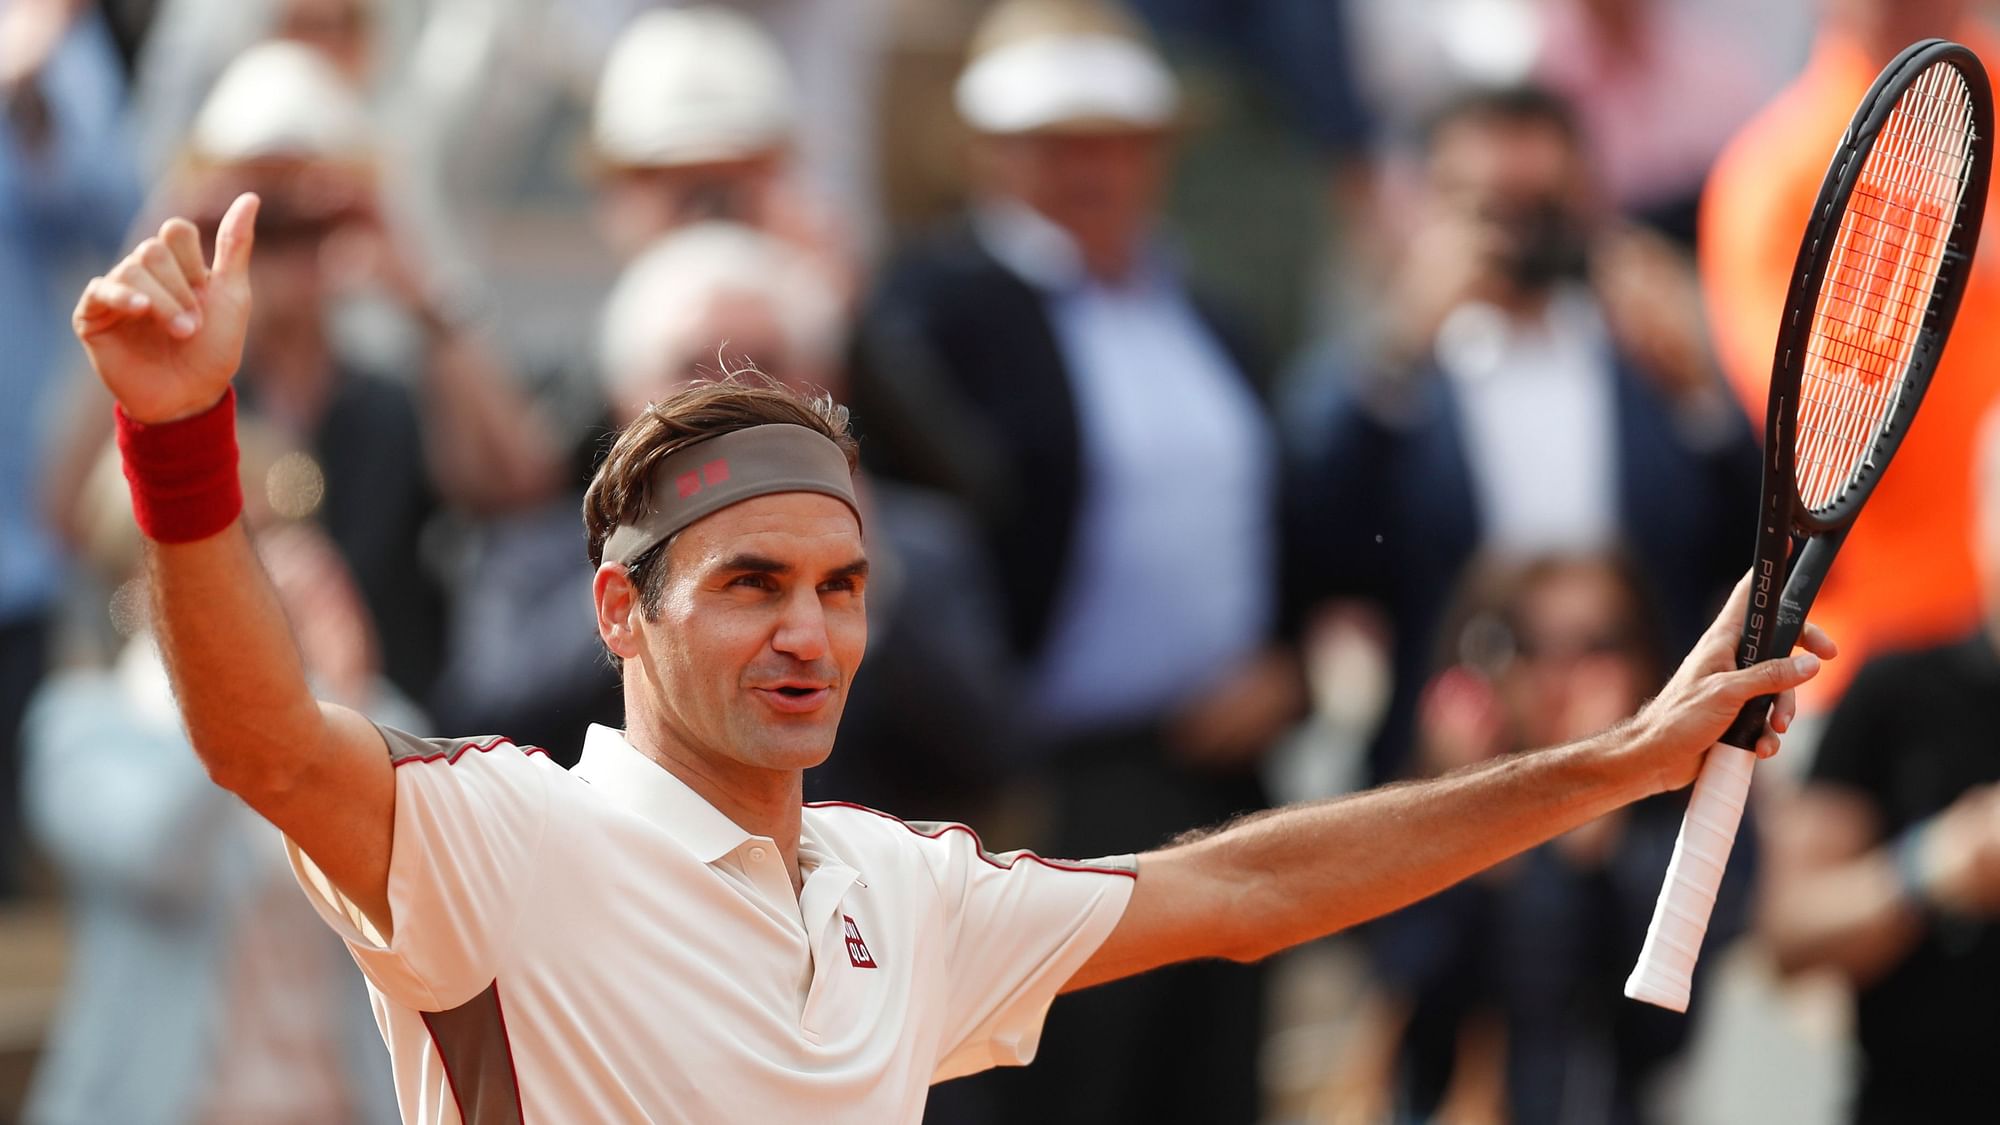 20 Years On, Federer Faces Fellow 1999 French Open Contender’s Son